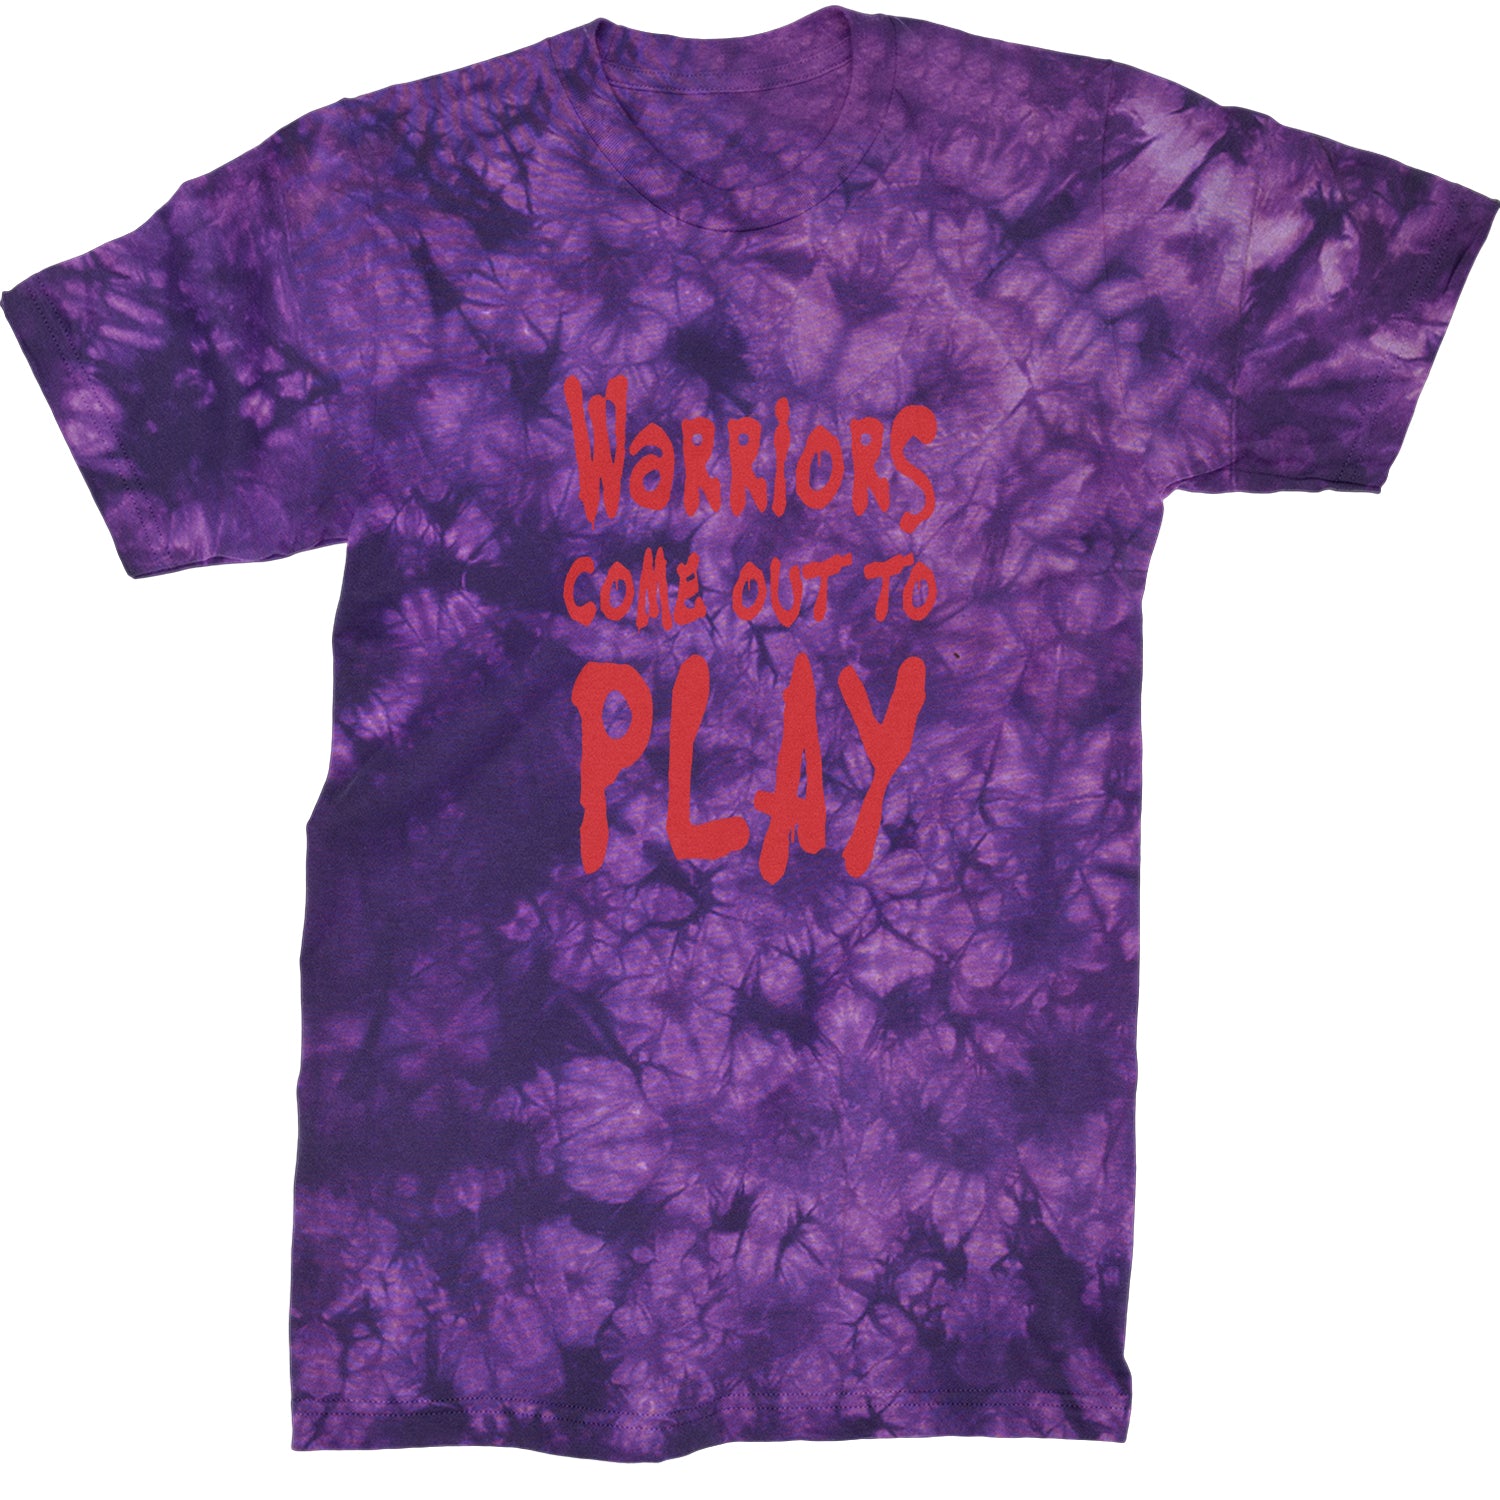 Warriors Come Out To Play  Mens T-shirt Tie-Dye Crystal Purple